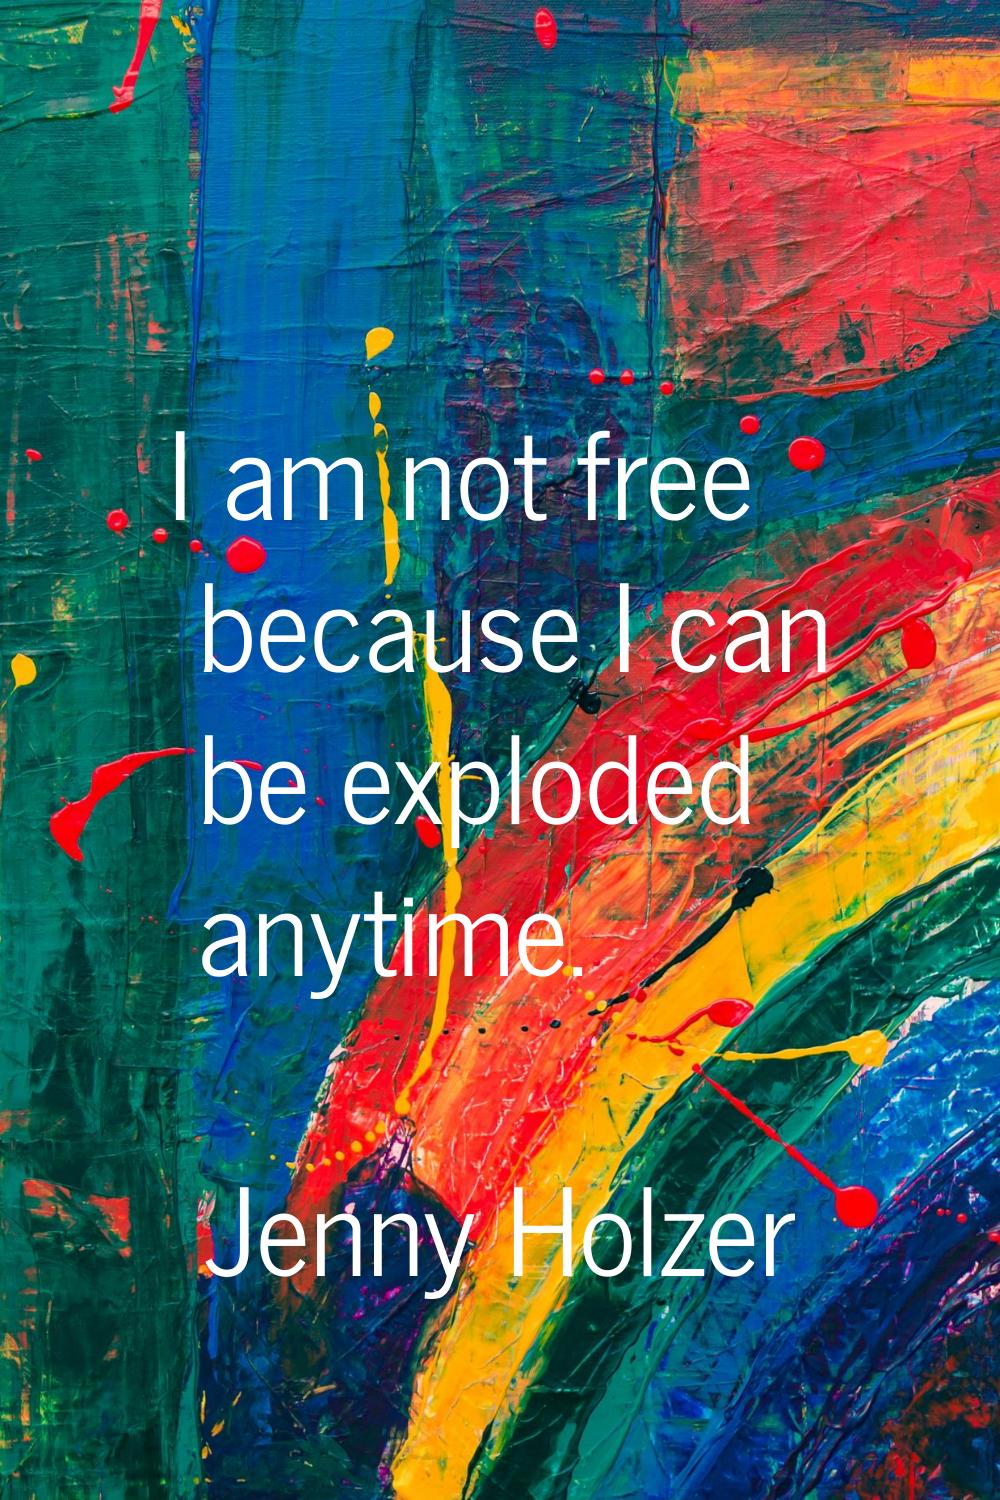 I am not free because I can be exploded anytime.